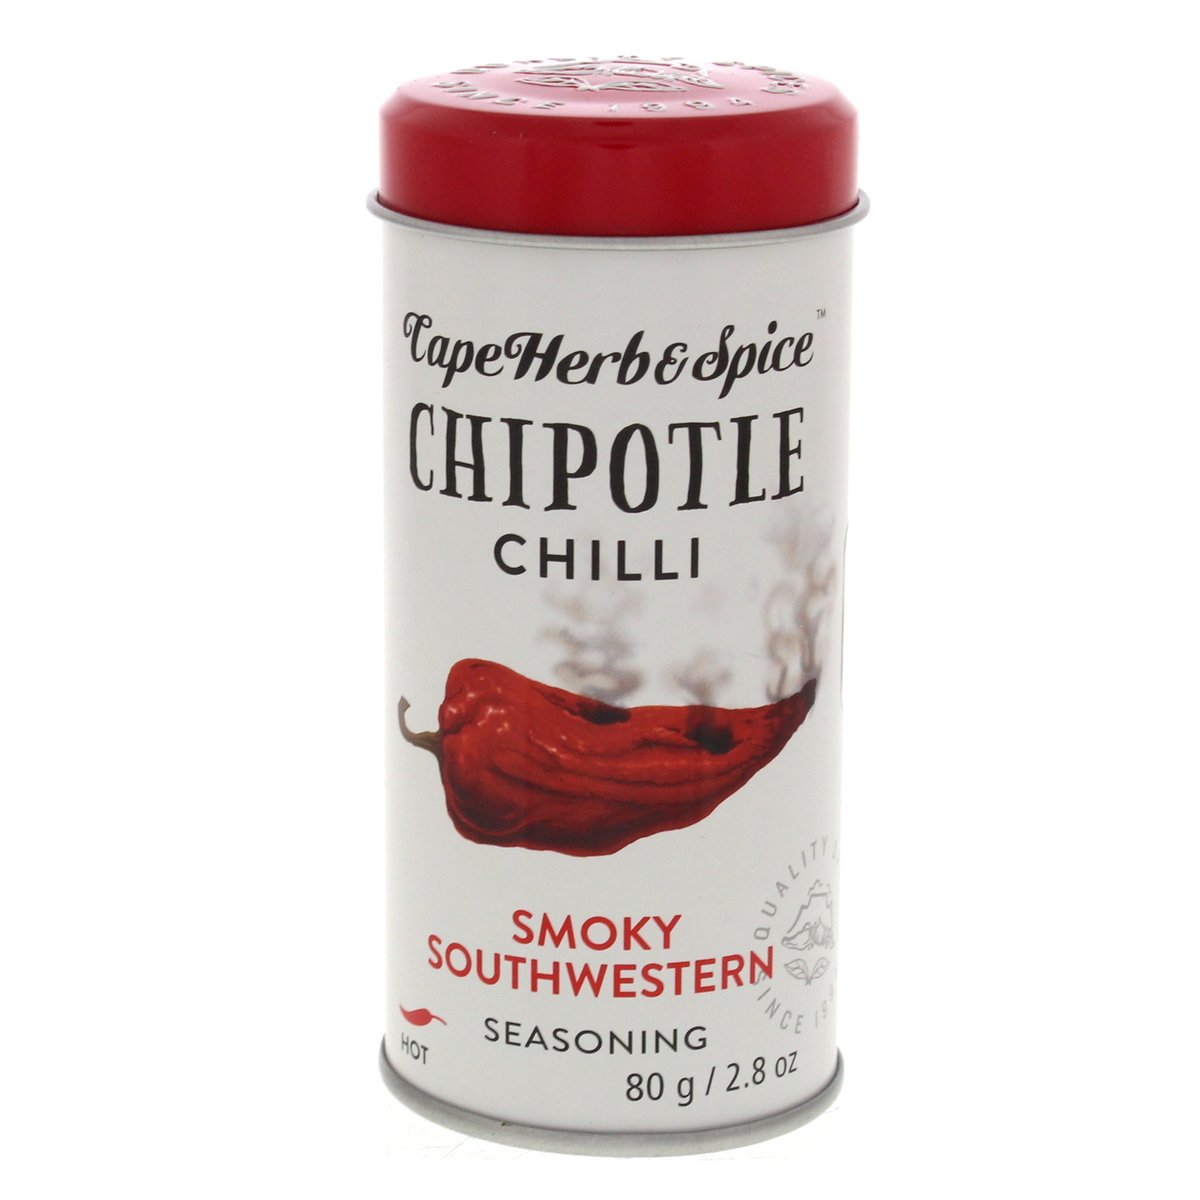 Cape Herb & Spice Chipotle Chilli Smoky South Western Seasoning 80g